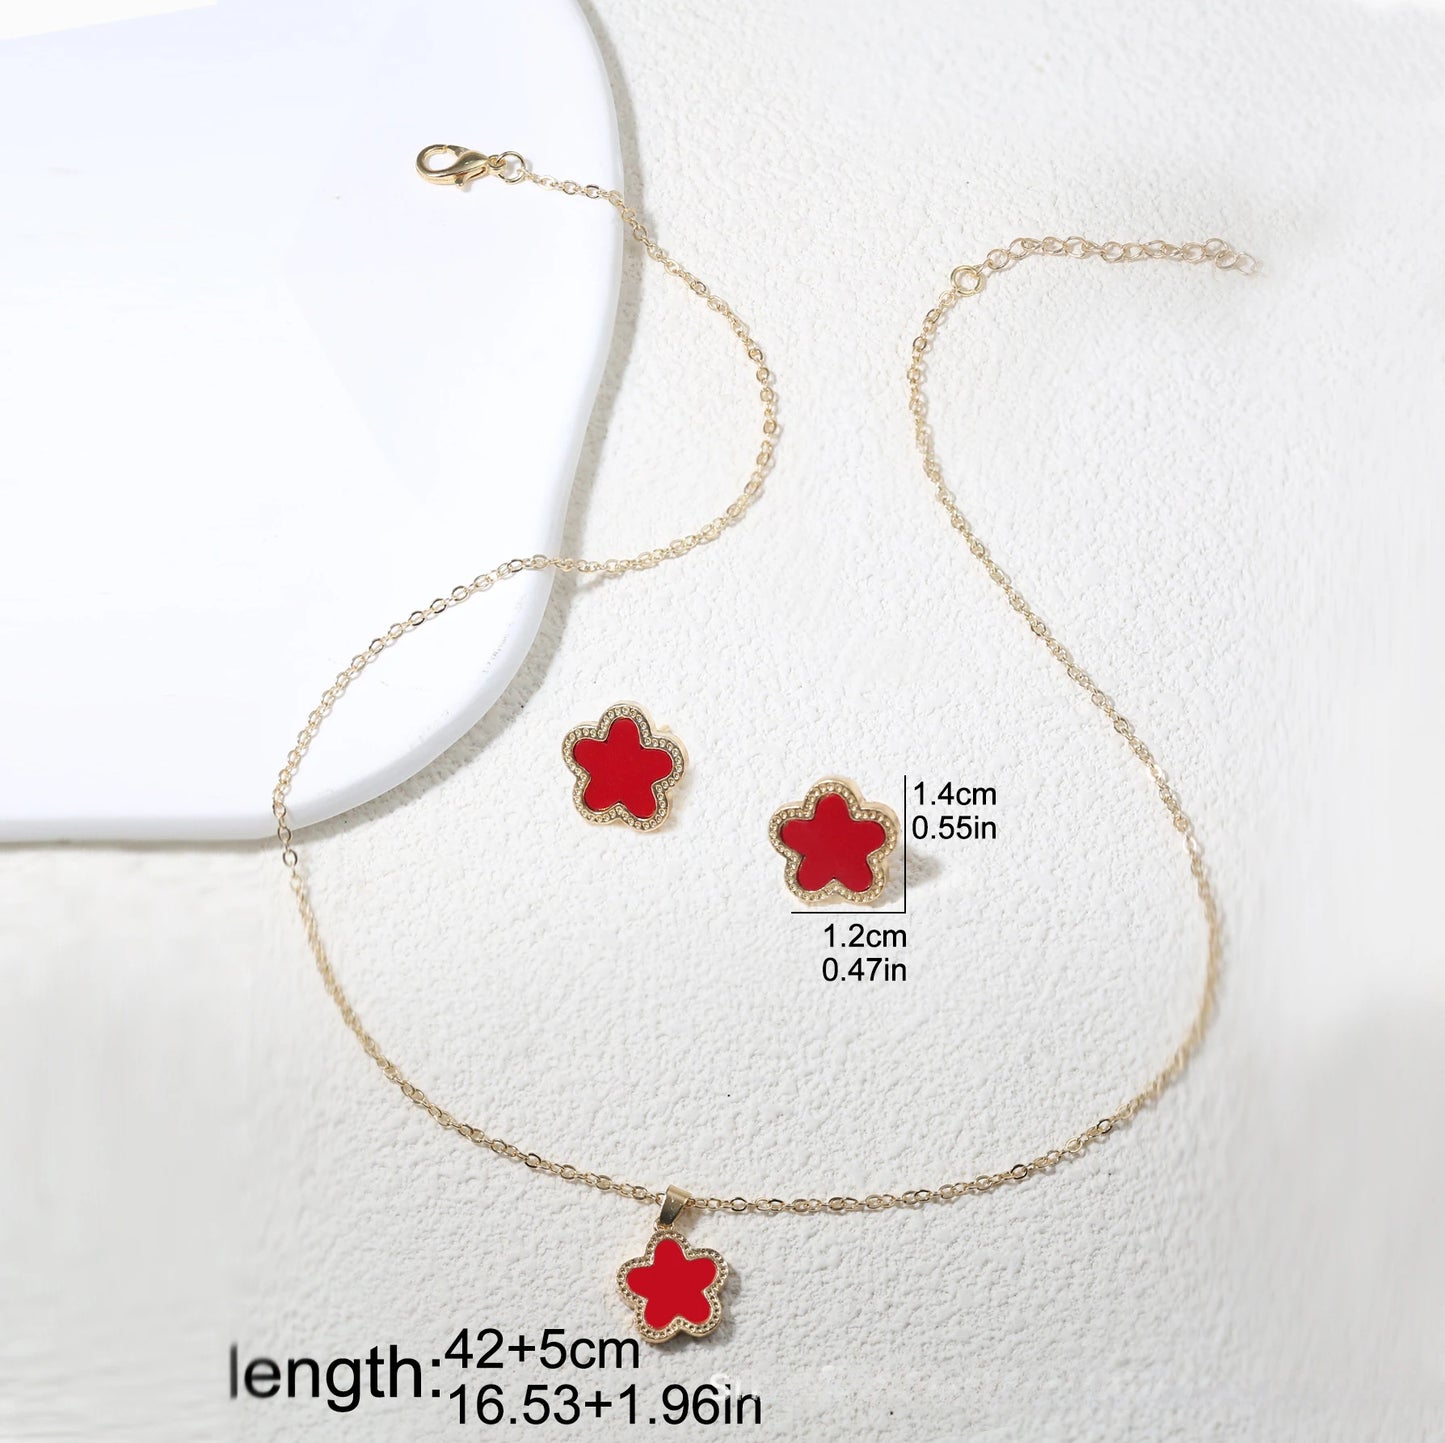 2Pcs Luxury Five Leaf Flower Pendant Jewelry Set for Women Gift Fashion Trendy Stainless Steel Clover Necklace Earring Jewelry